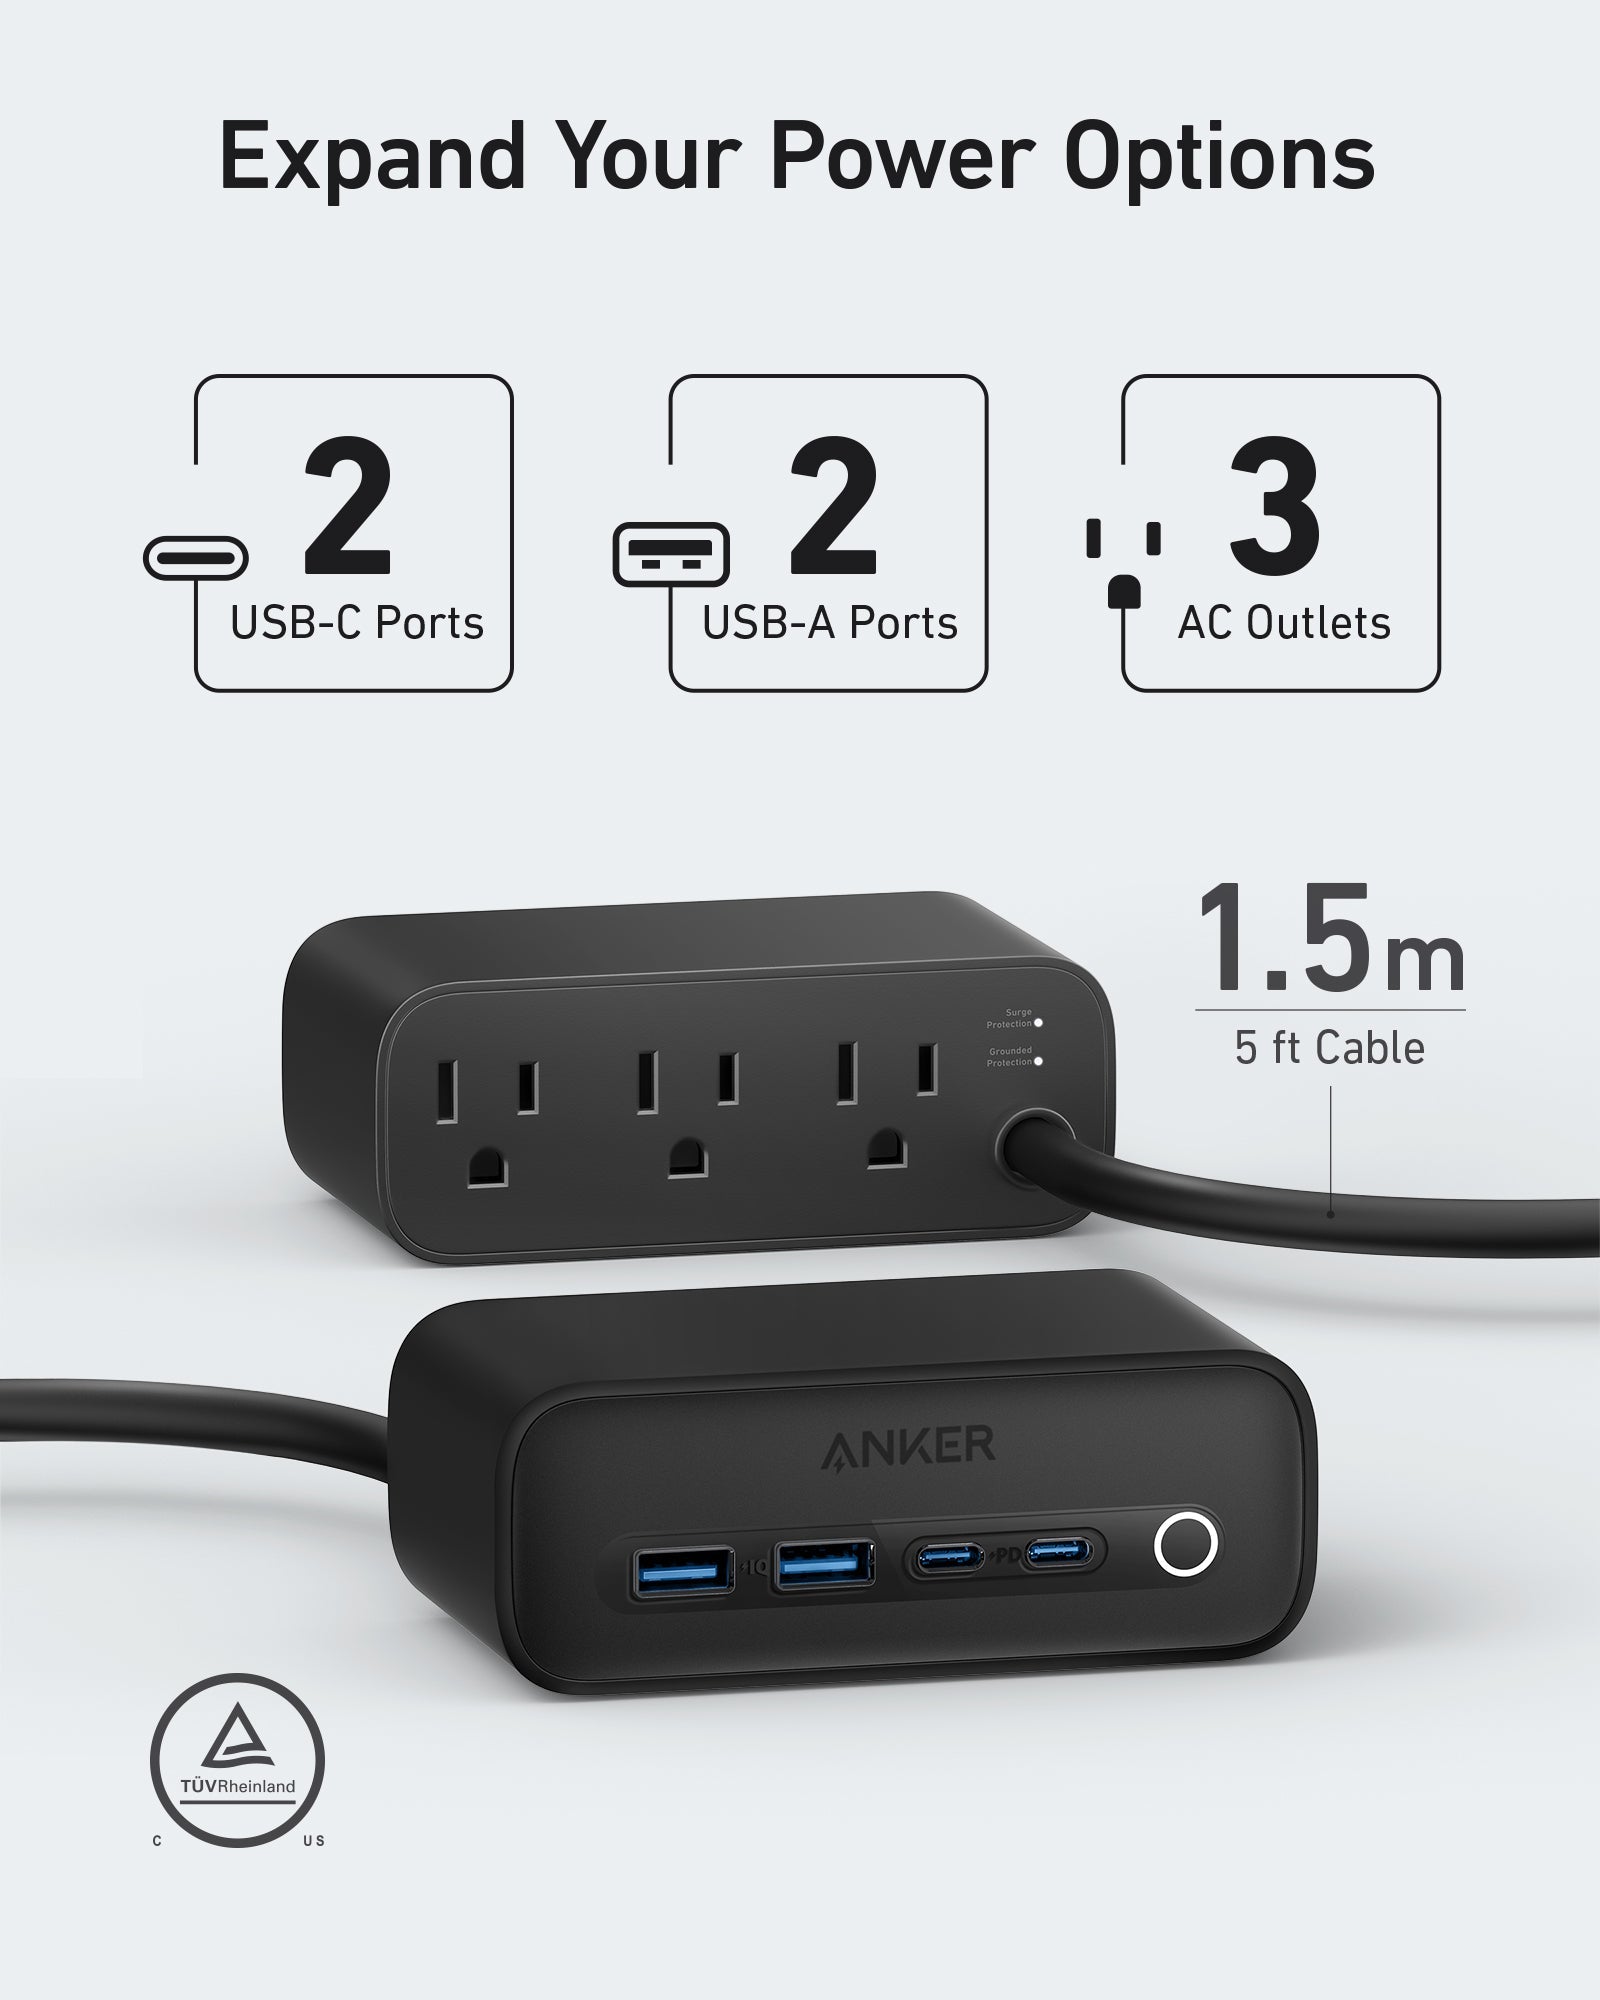 10 Best USB C Charging Stations for All Your Devices